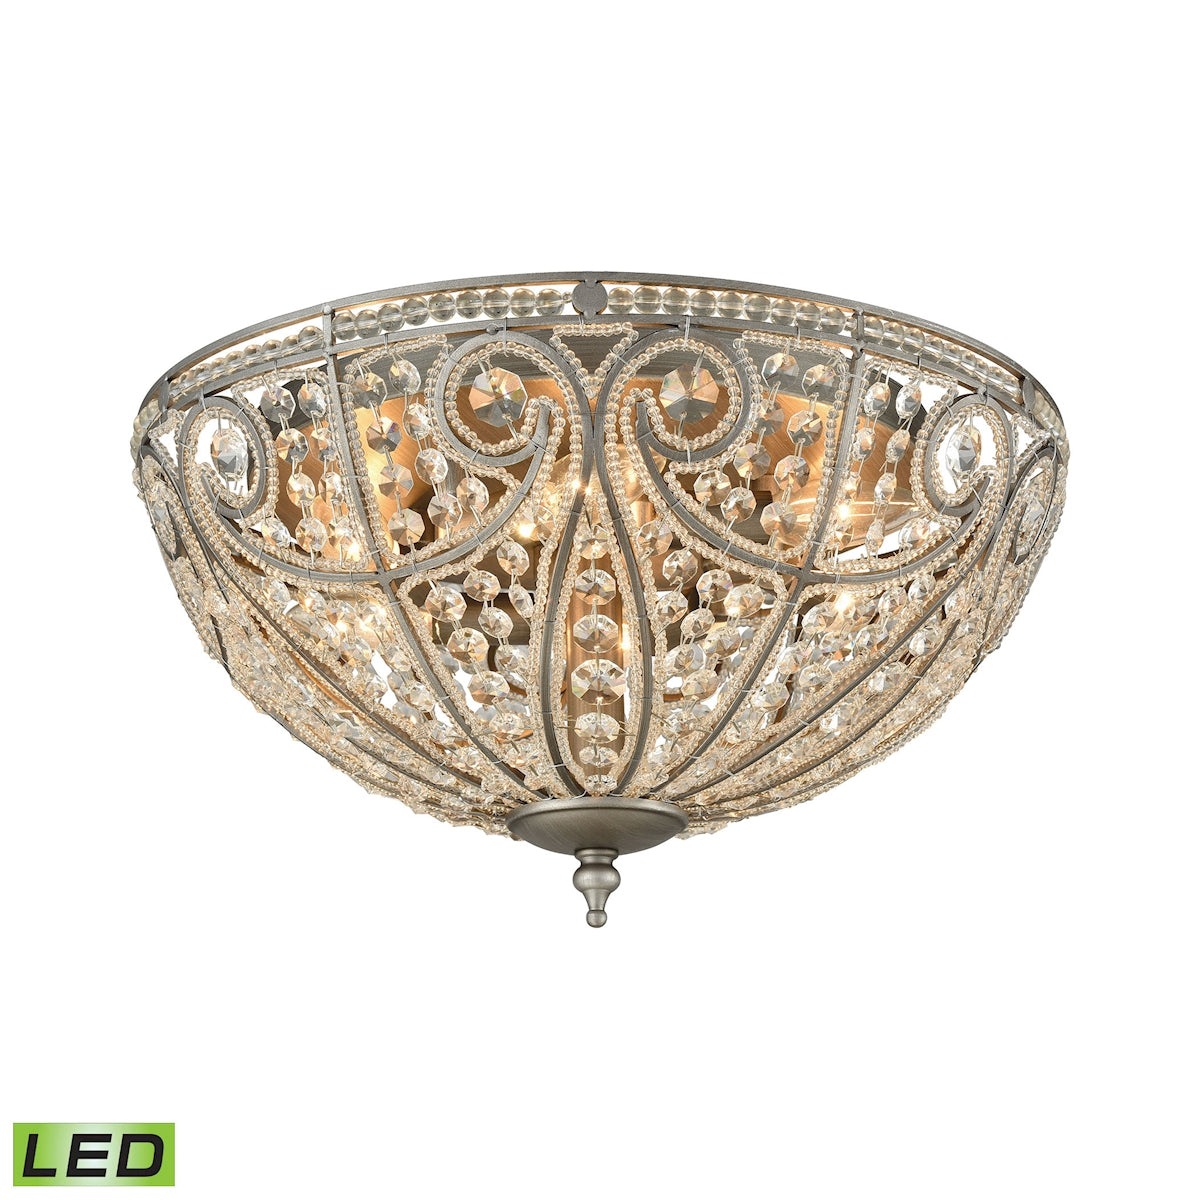 ELK Lighting 15994/6-LED Elizabethan 6-Light Flush Mount in Weathered Zinc with Clear Crystal - Includes LED Bulbs